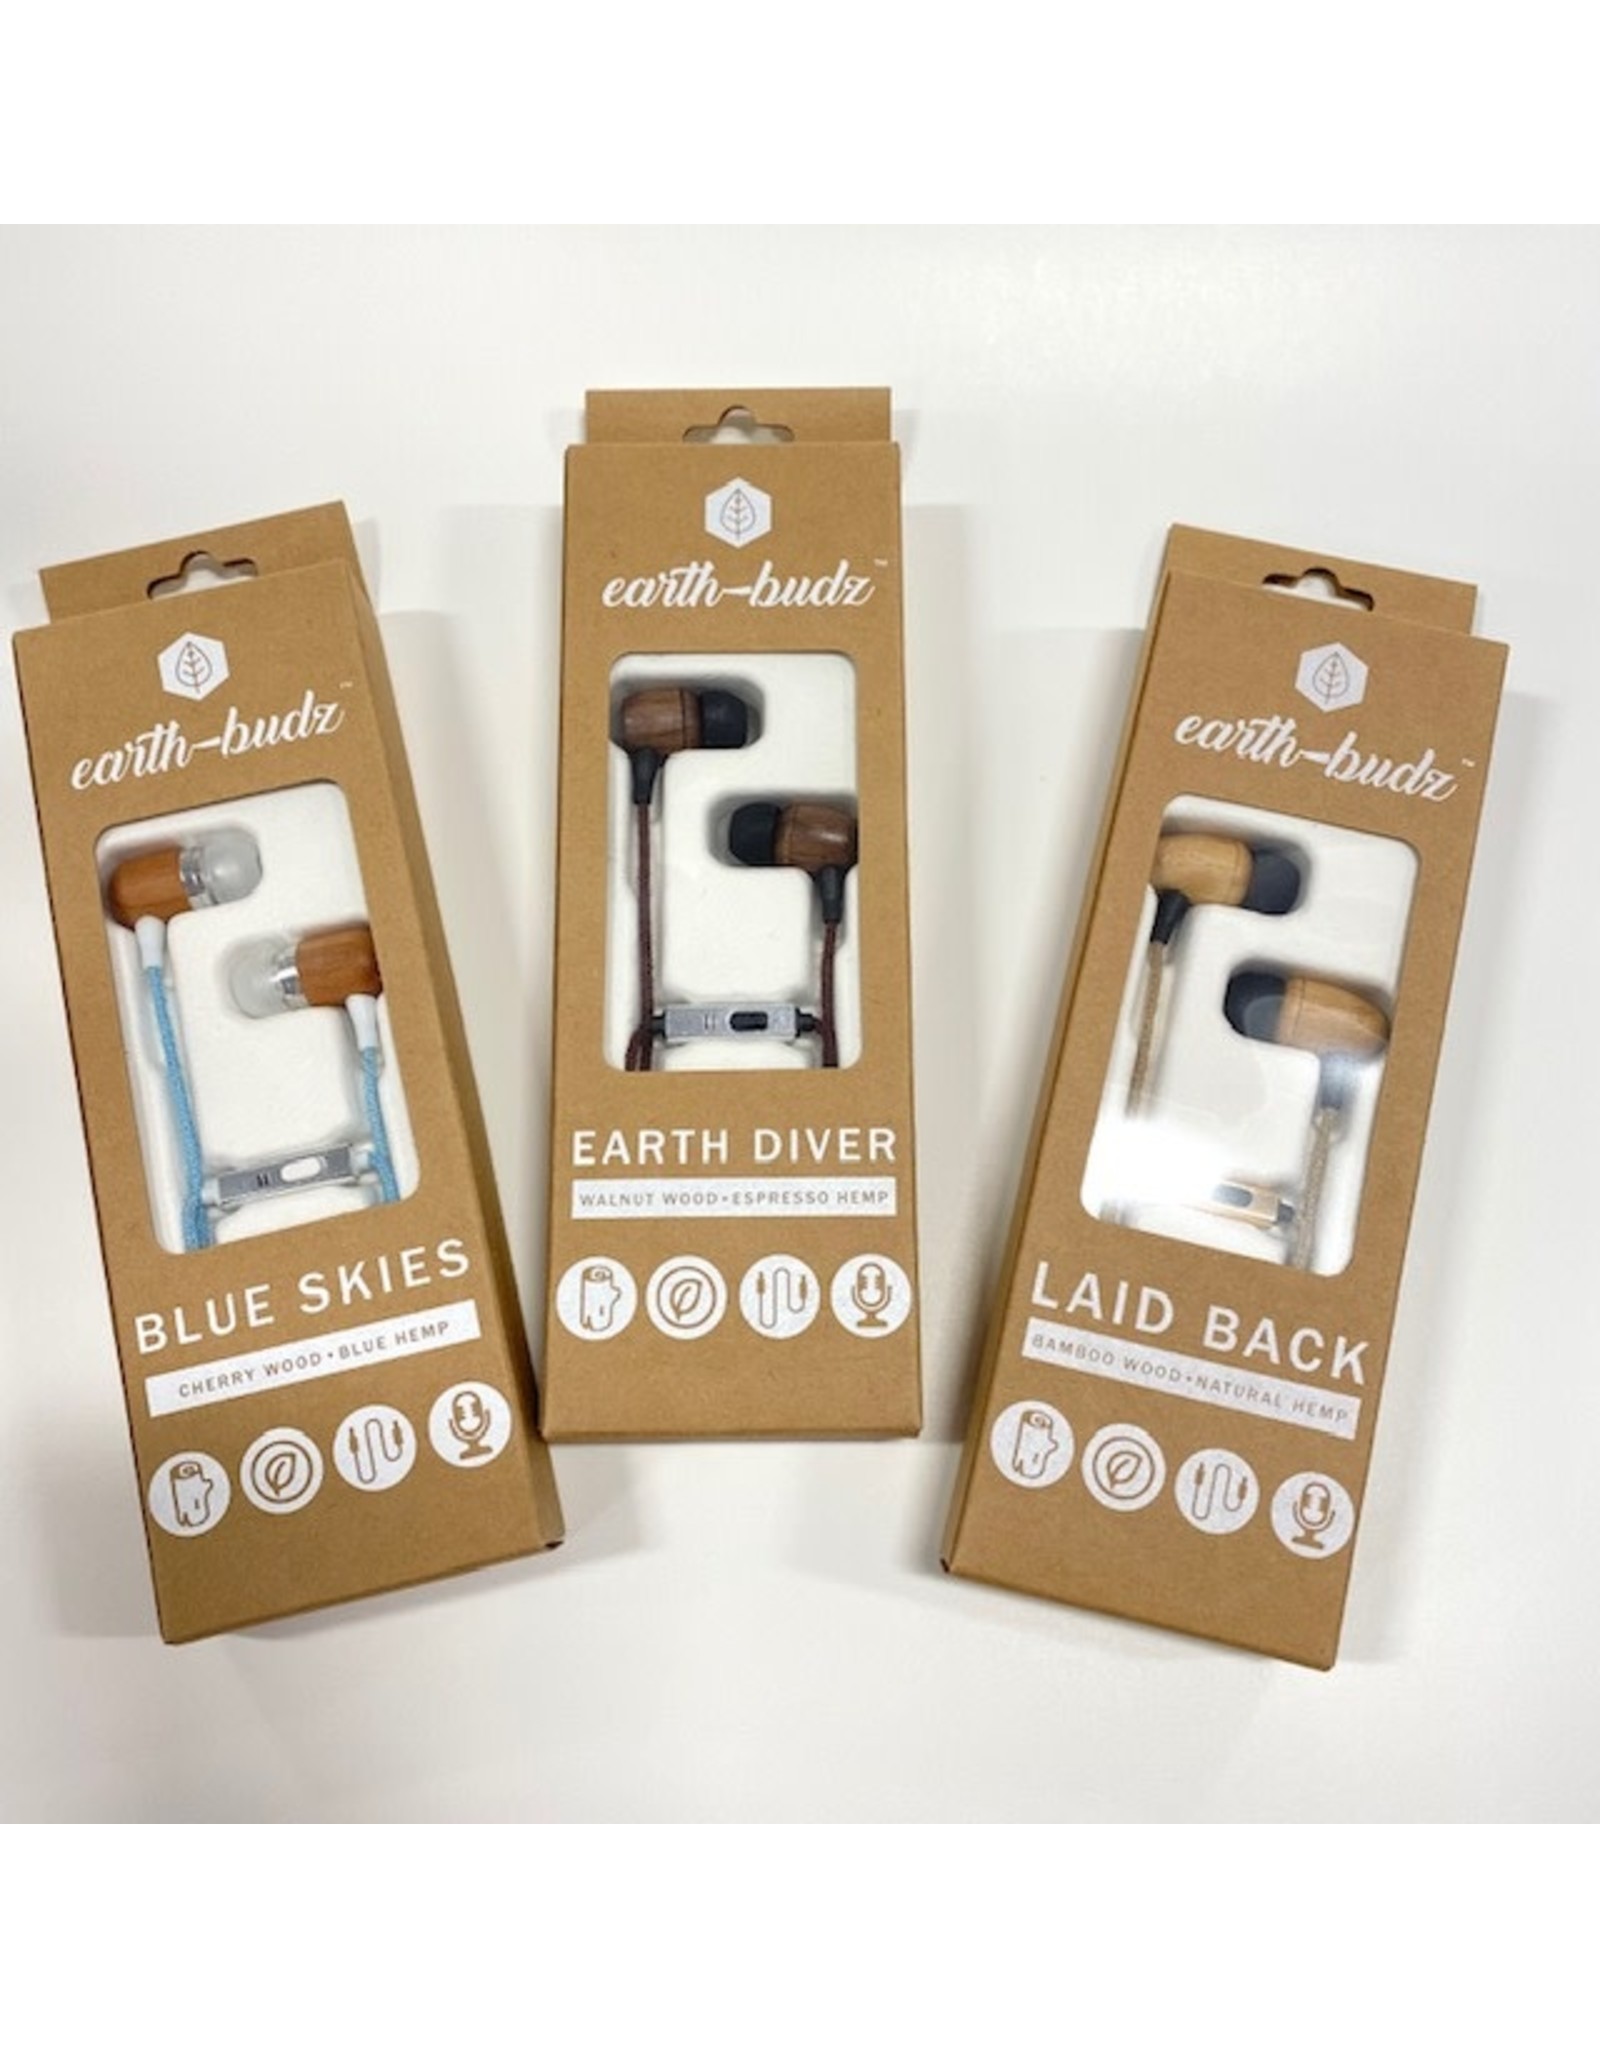 2X MOBILE 2X Mobile Earbuds Earth-Budz-